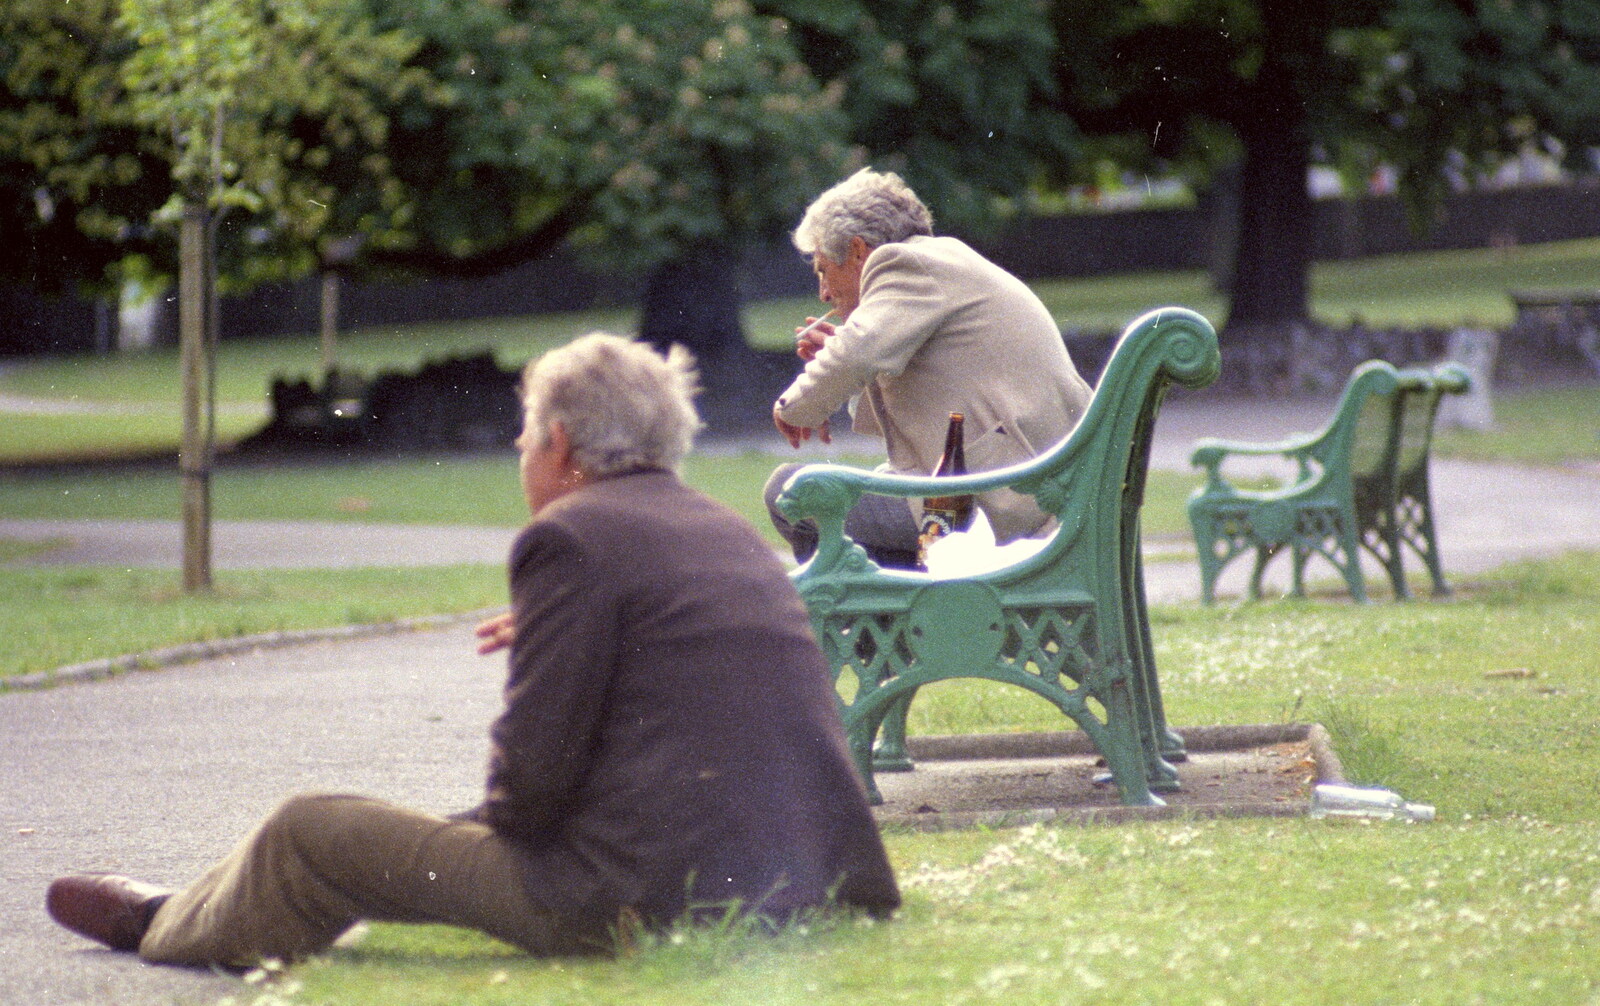 The two tramps in Beaumont Park from Uni: Scenes of Plymouth and the PPSU Bar, Plymouth Polytechnic, Devon - 28th April 1986